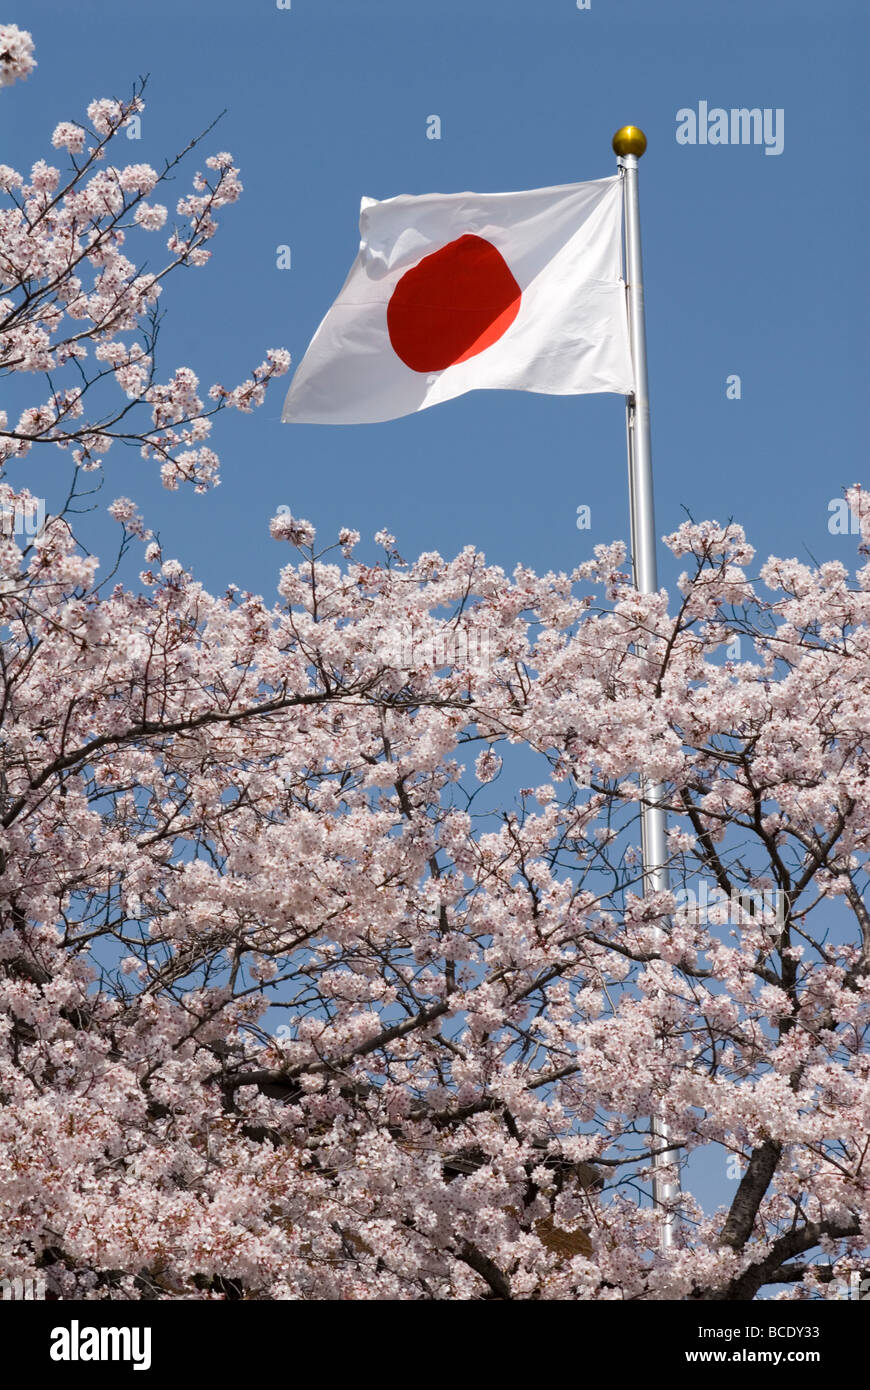 The hinomaru, or national flag of Japan, is surrounded by flowering cherry trees Stock Photo